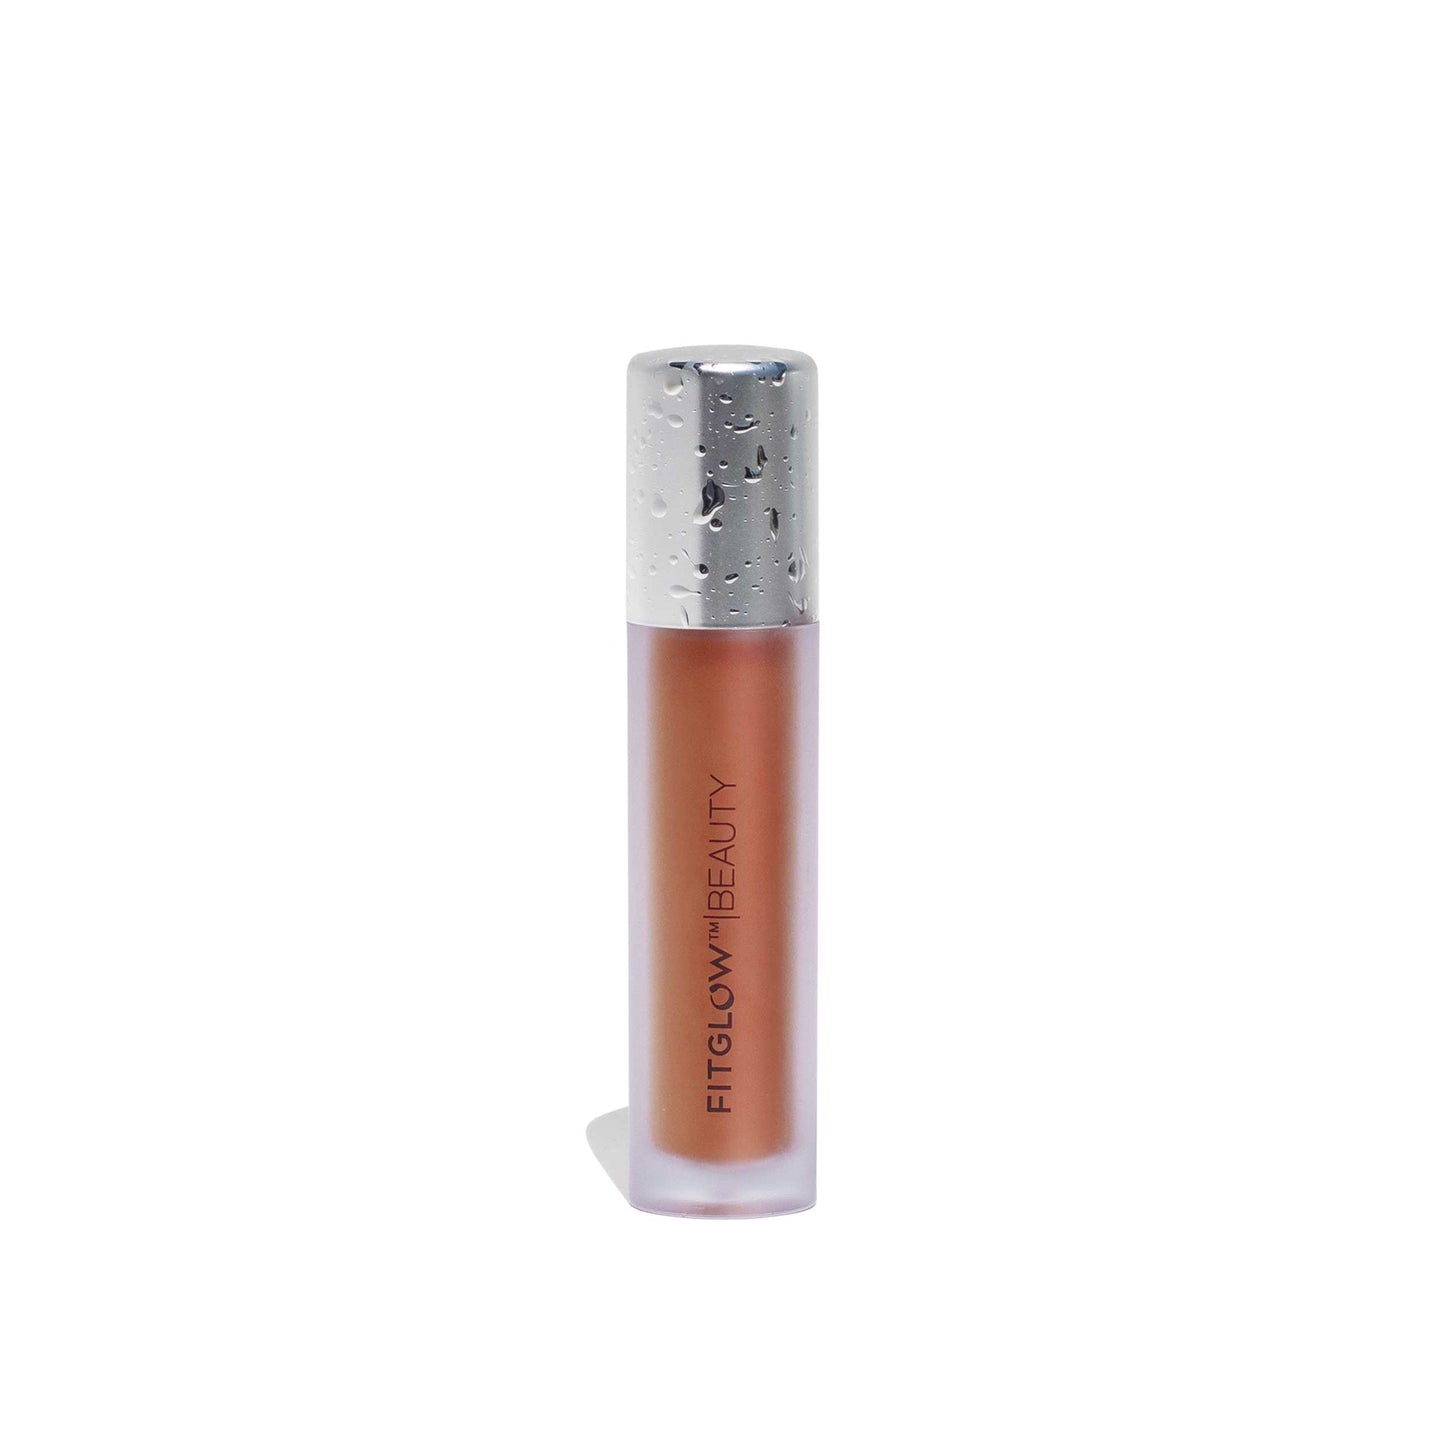 FitGlow Lip Serum - Beach Glow - Sheer Bronze colour with white background